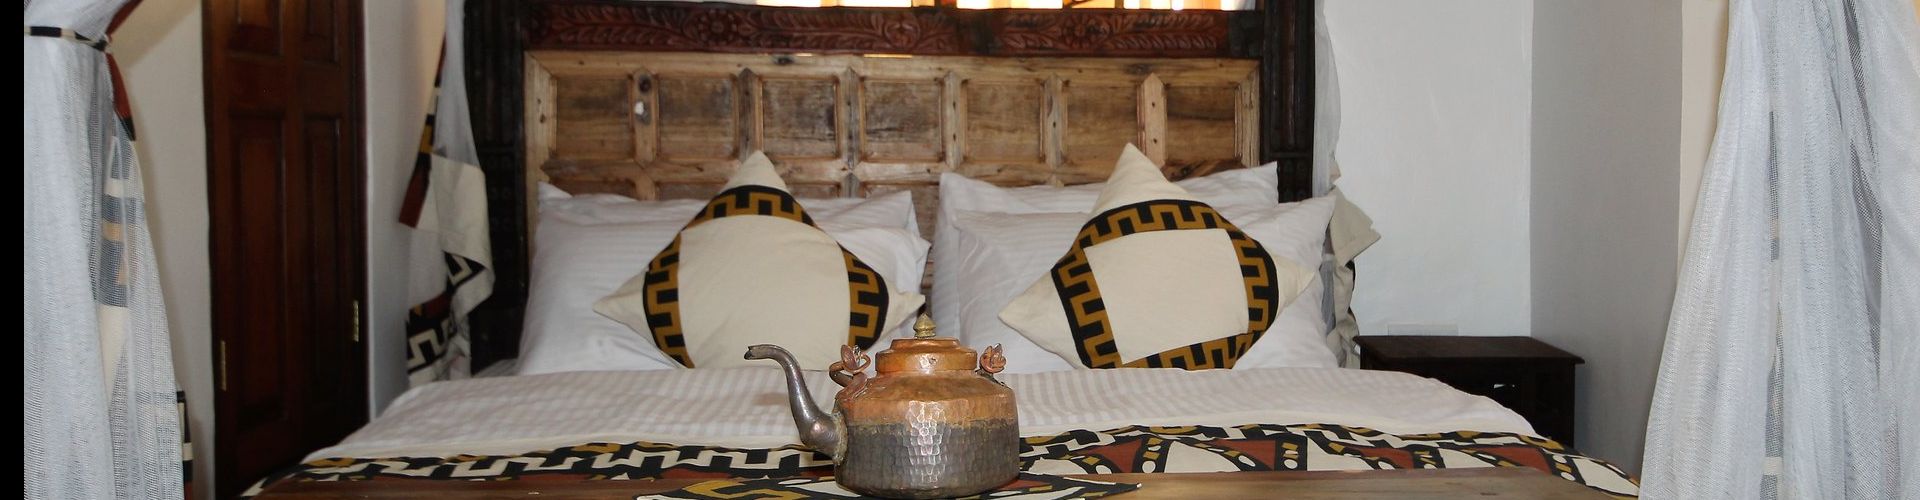 King Size Bed in Shaba Boutique accommodation in Zanzibar Stone Town